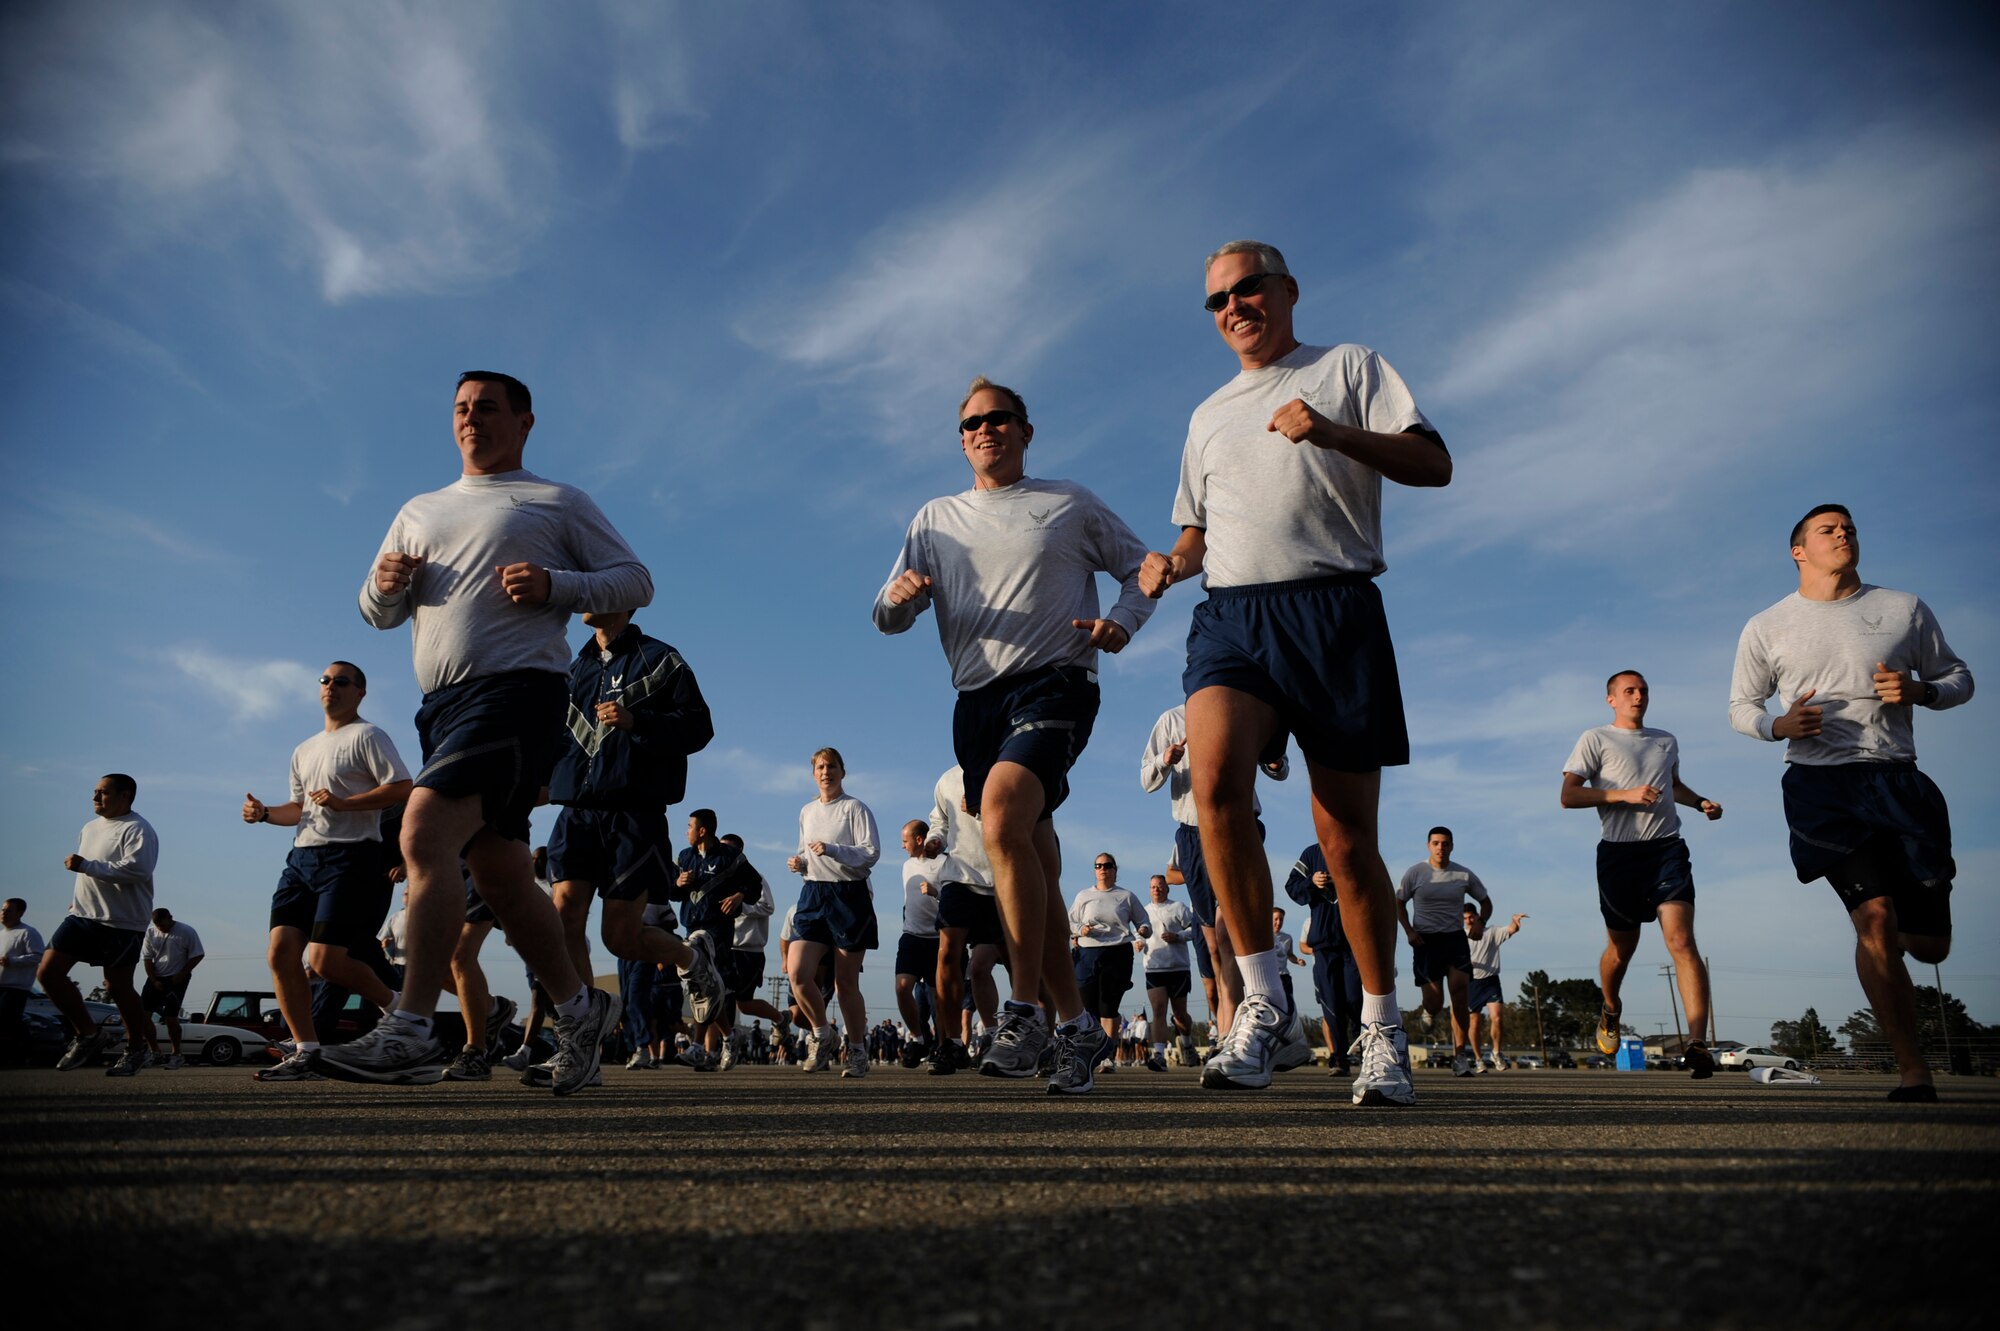 VANDENBERG AIR FORCE BASE, Calif. -- Team V members begin to run during the Wing Run at the parade grounds here Tuesday, May 31, 2011.  The 30th WS led the Wing Run before the squadron inactivates on Friday, June 3.  (U.S. Air Force photo/Staff Sgt. Andrew Satran) 

   